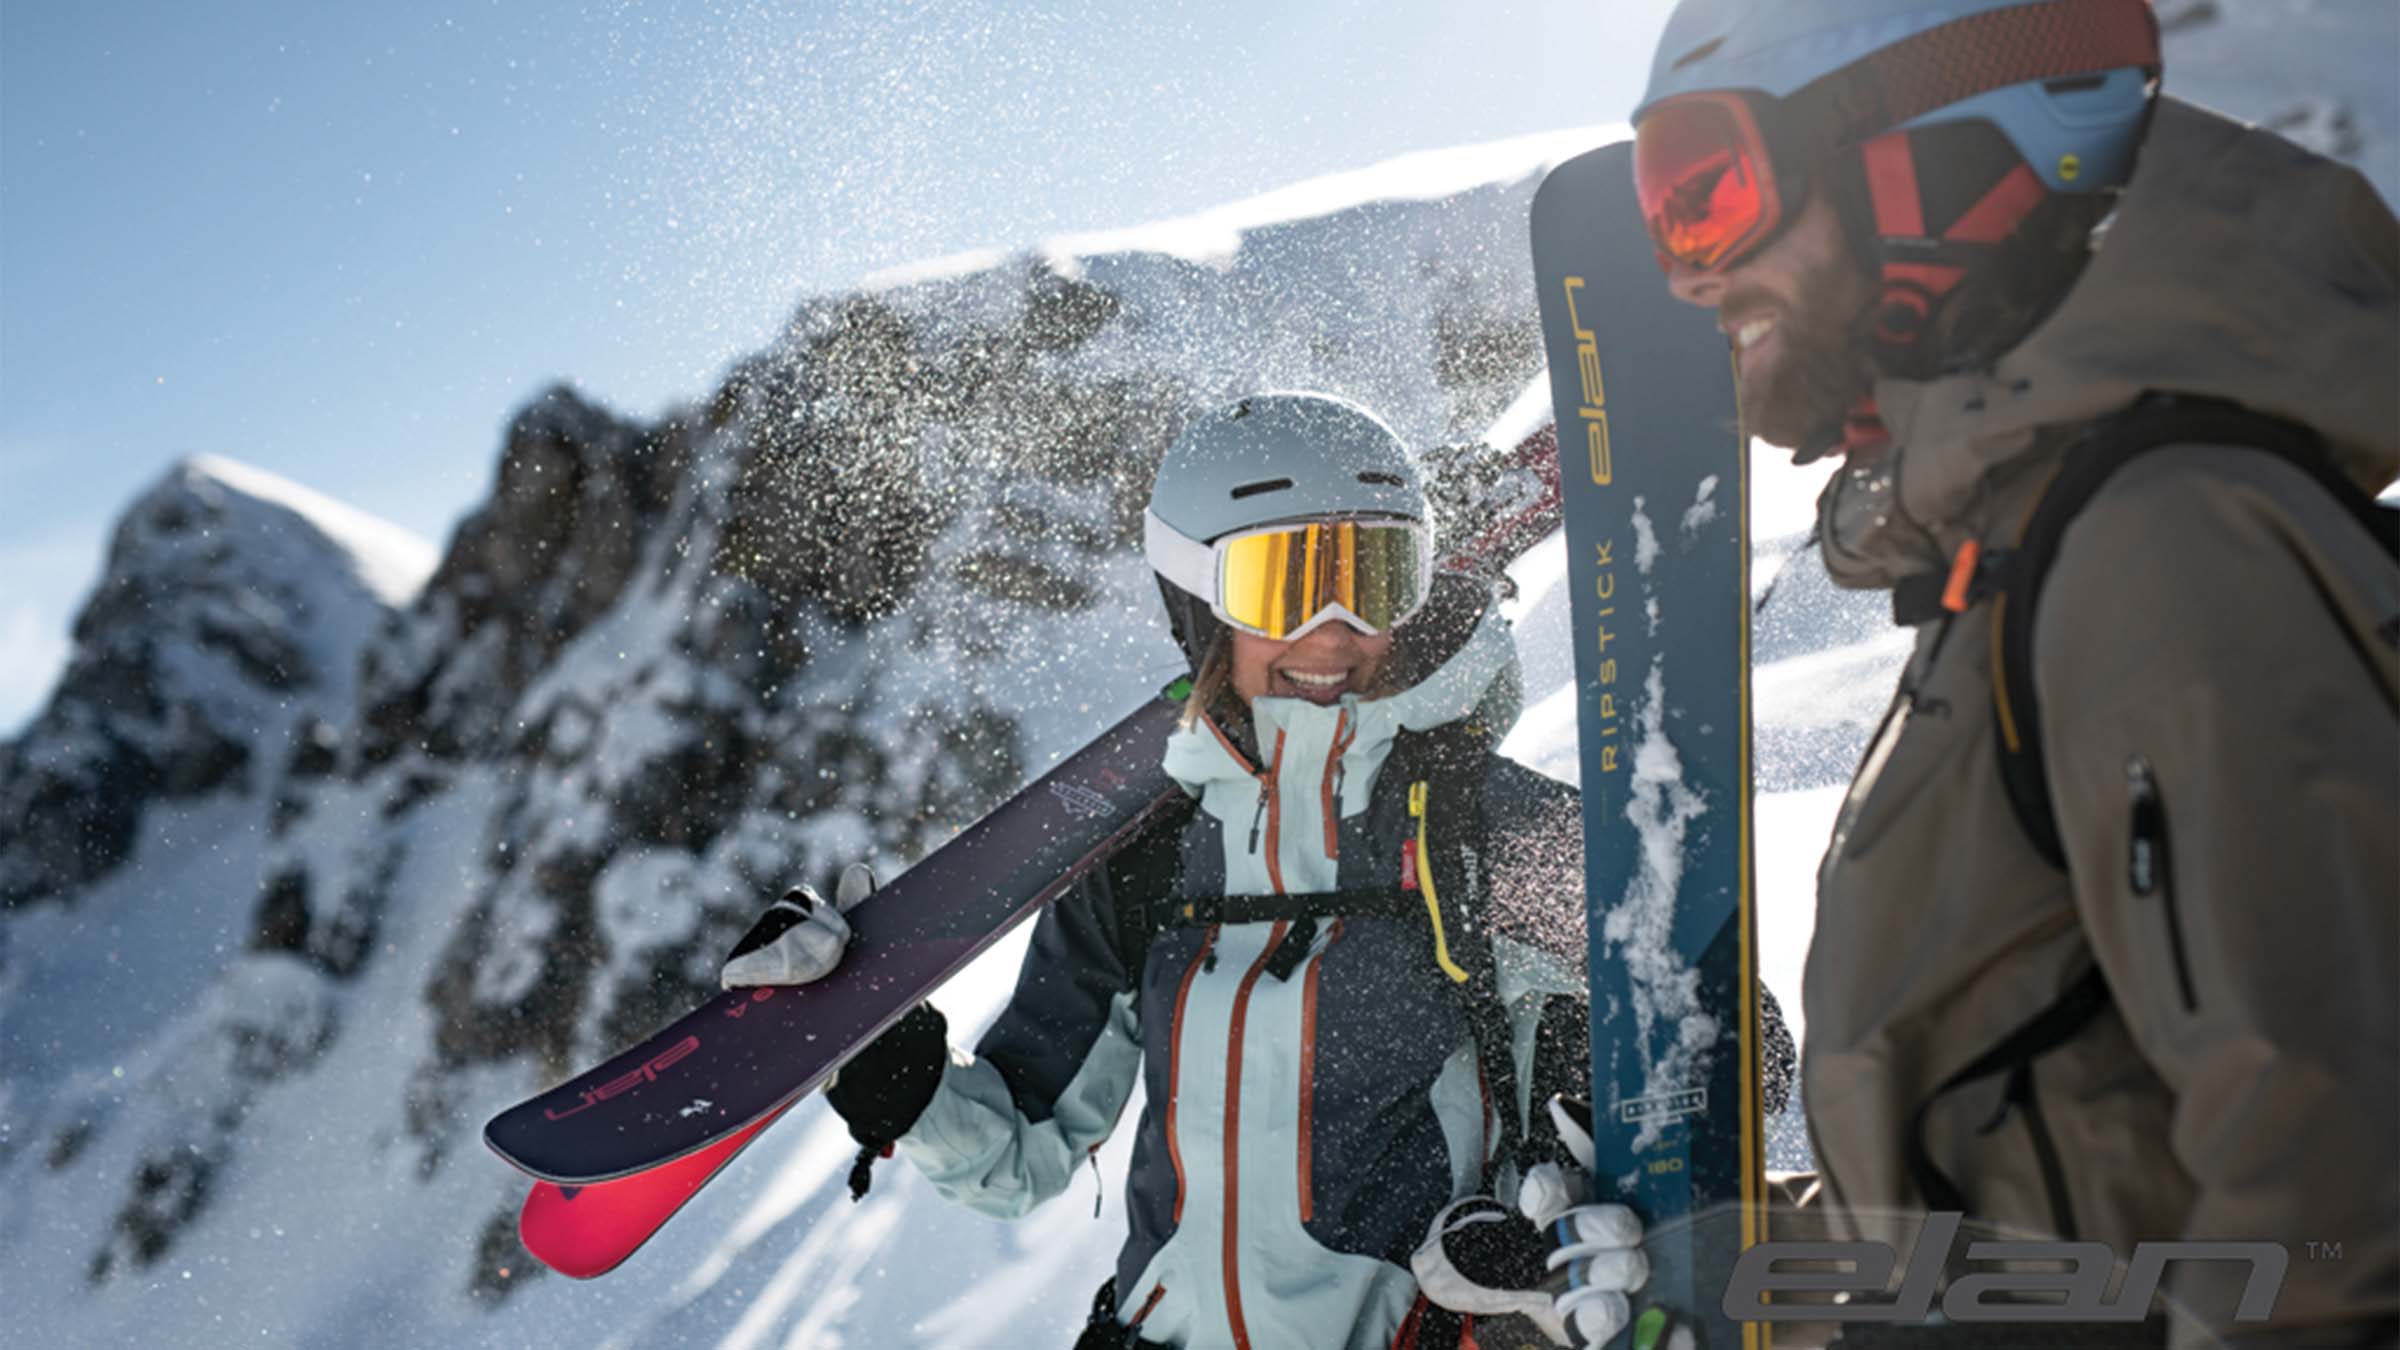 Two Skiers chatting and holding Elan skis